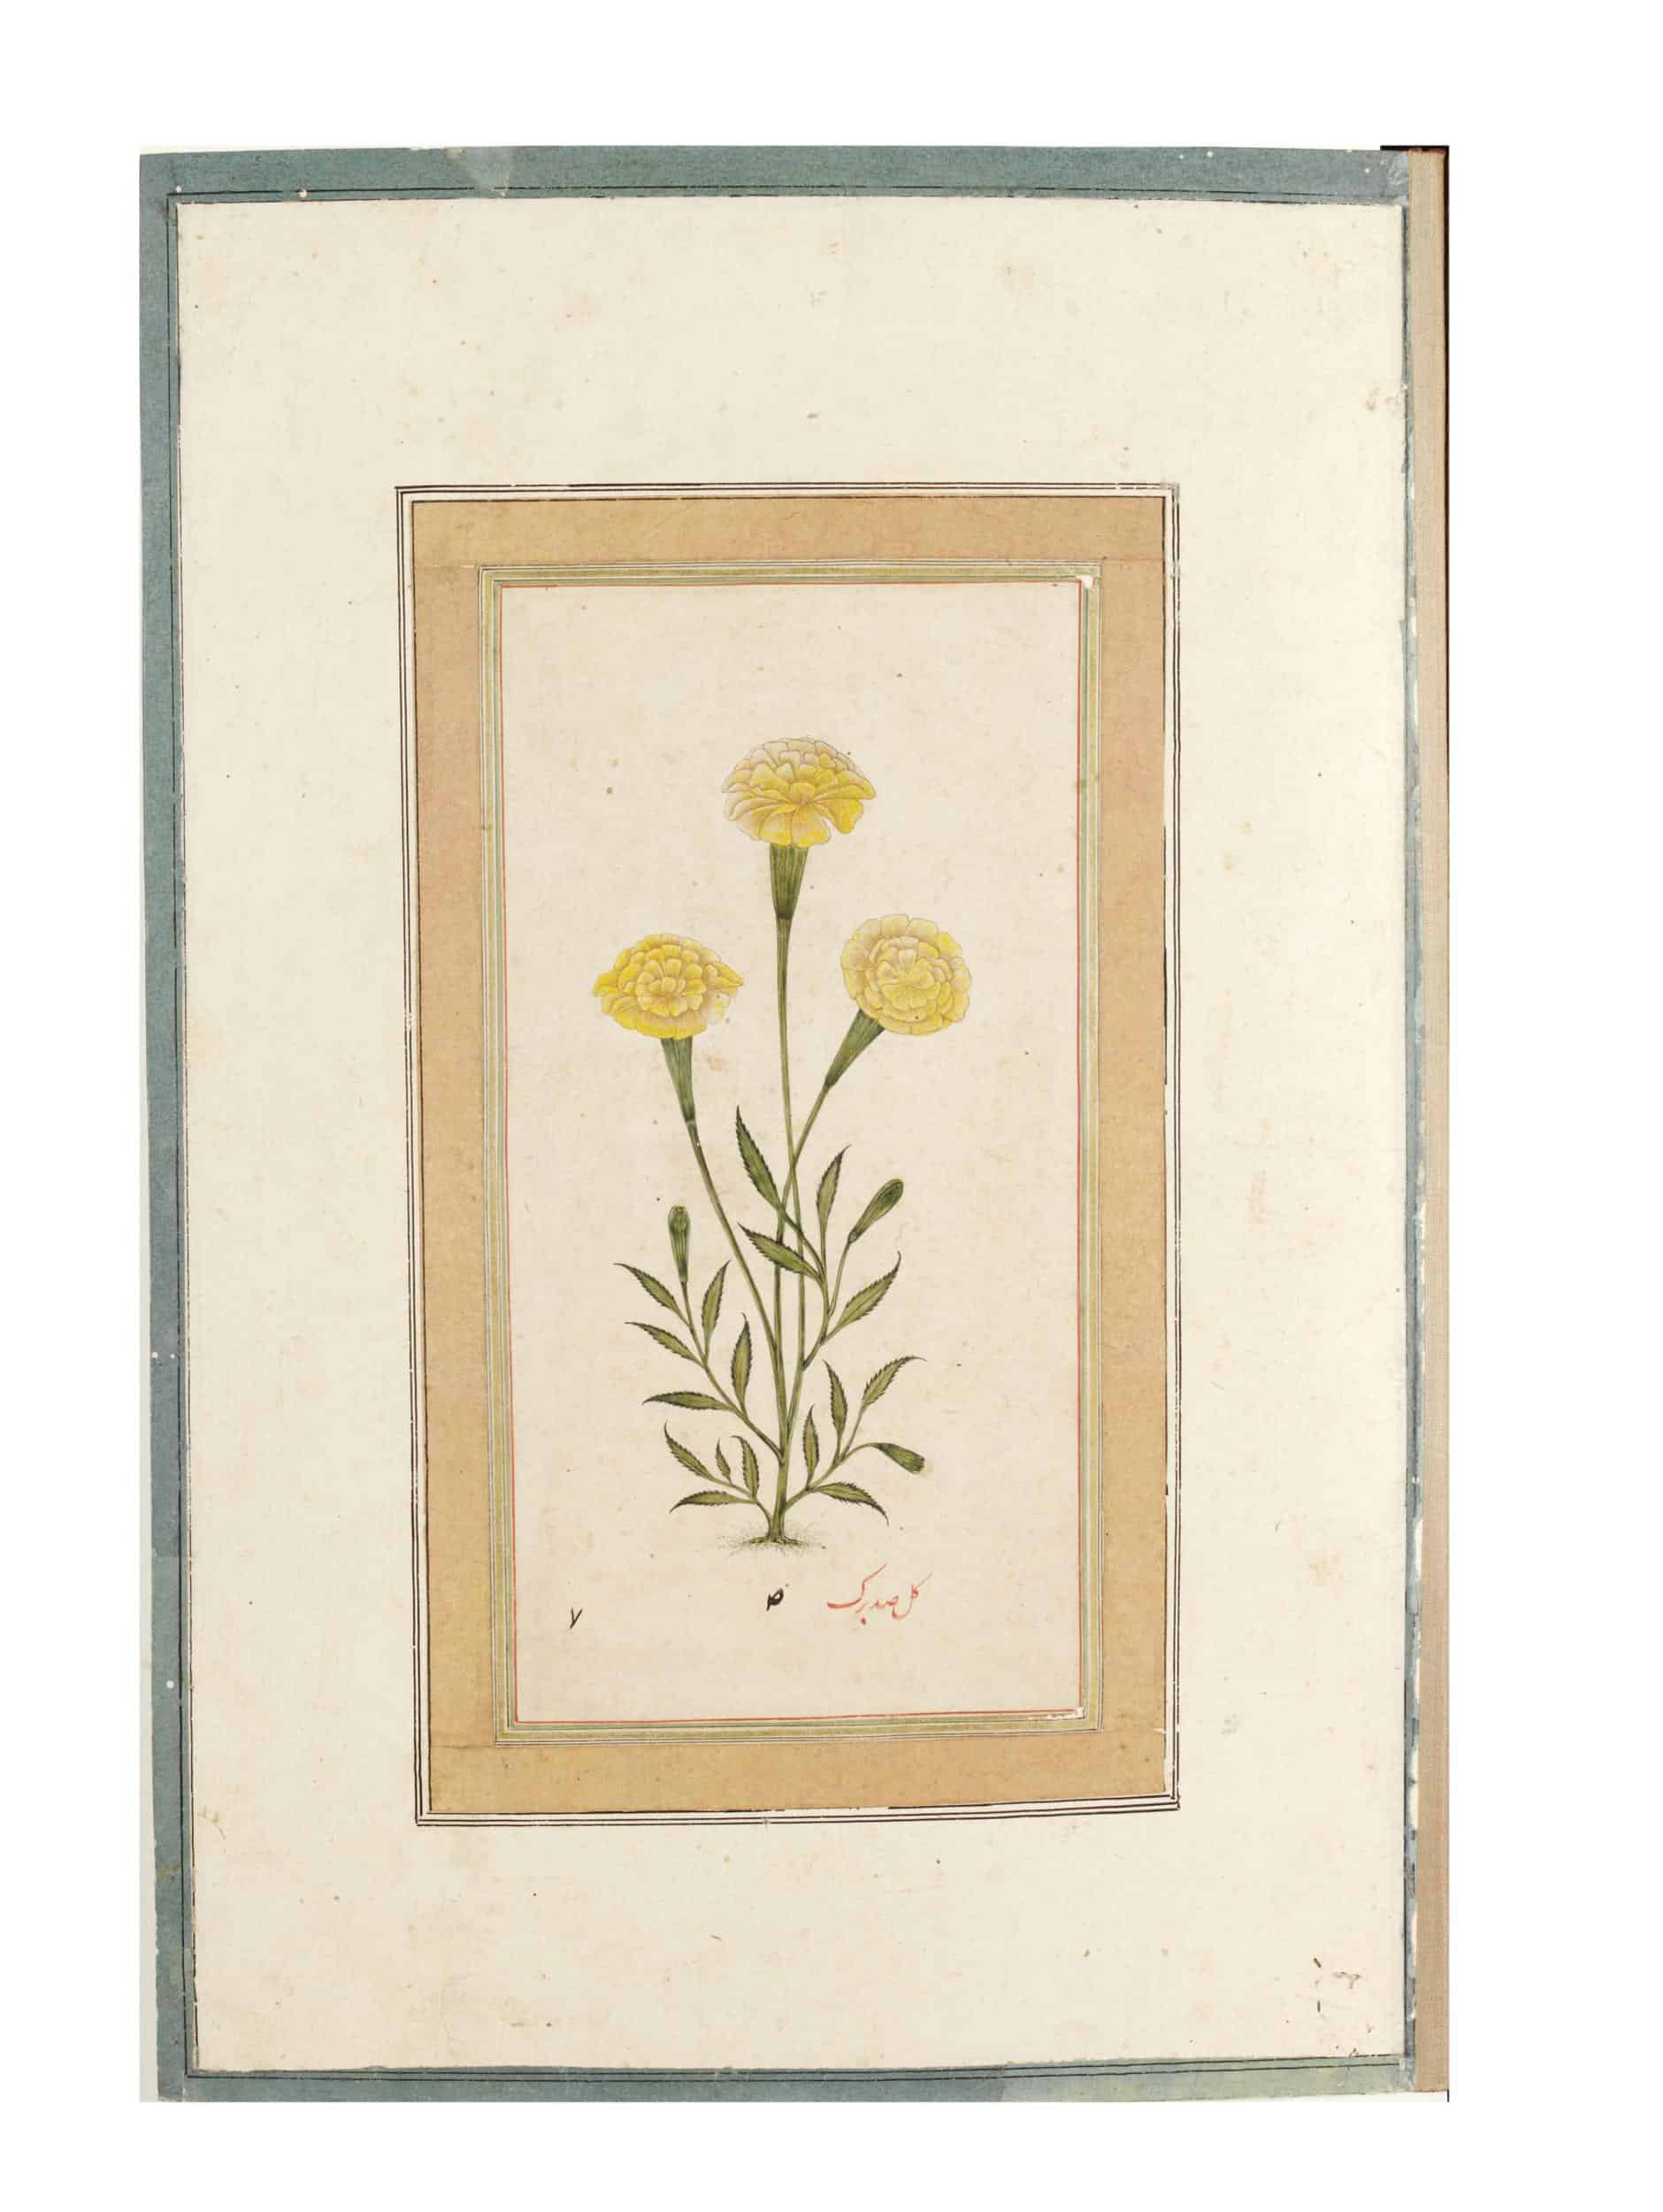 THE MUGHAL RULERS LOVE FOR BEAUTIFUL FLOWERS AND FLORAL DESIGNS